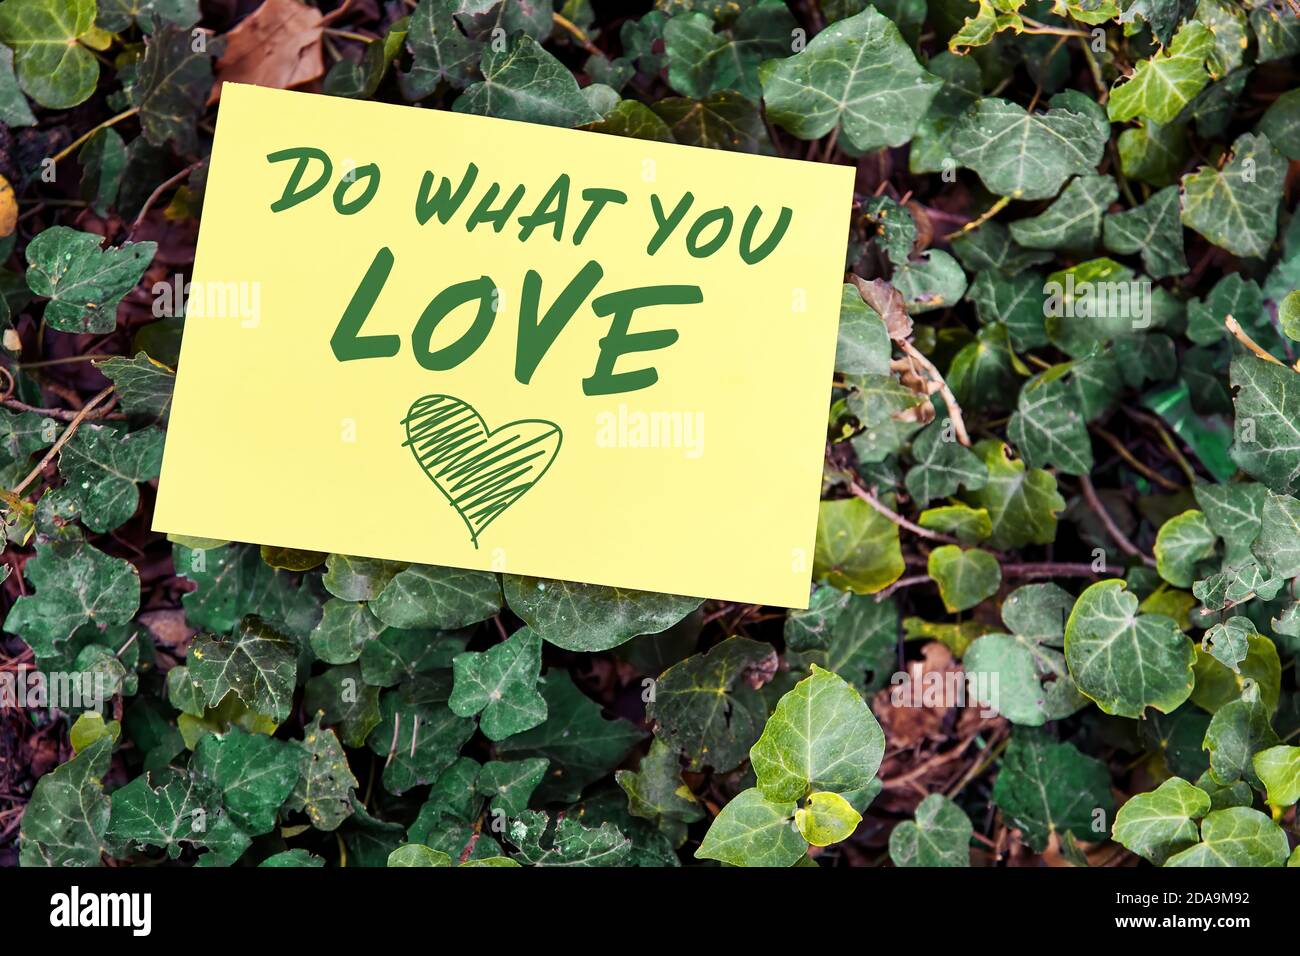 Do what you love concept written on paper on green leaf background. Inspirational quote for motivation, happiness or success in business or life. Stock Photo